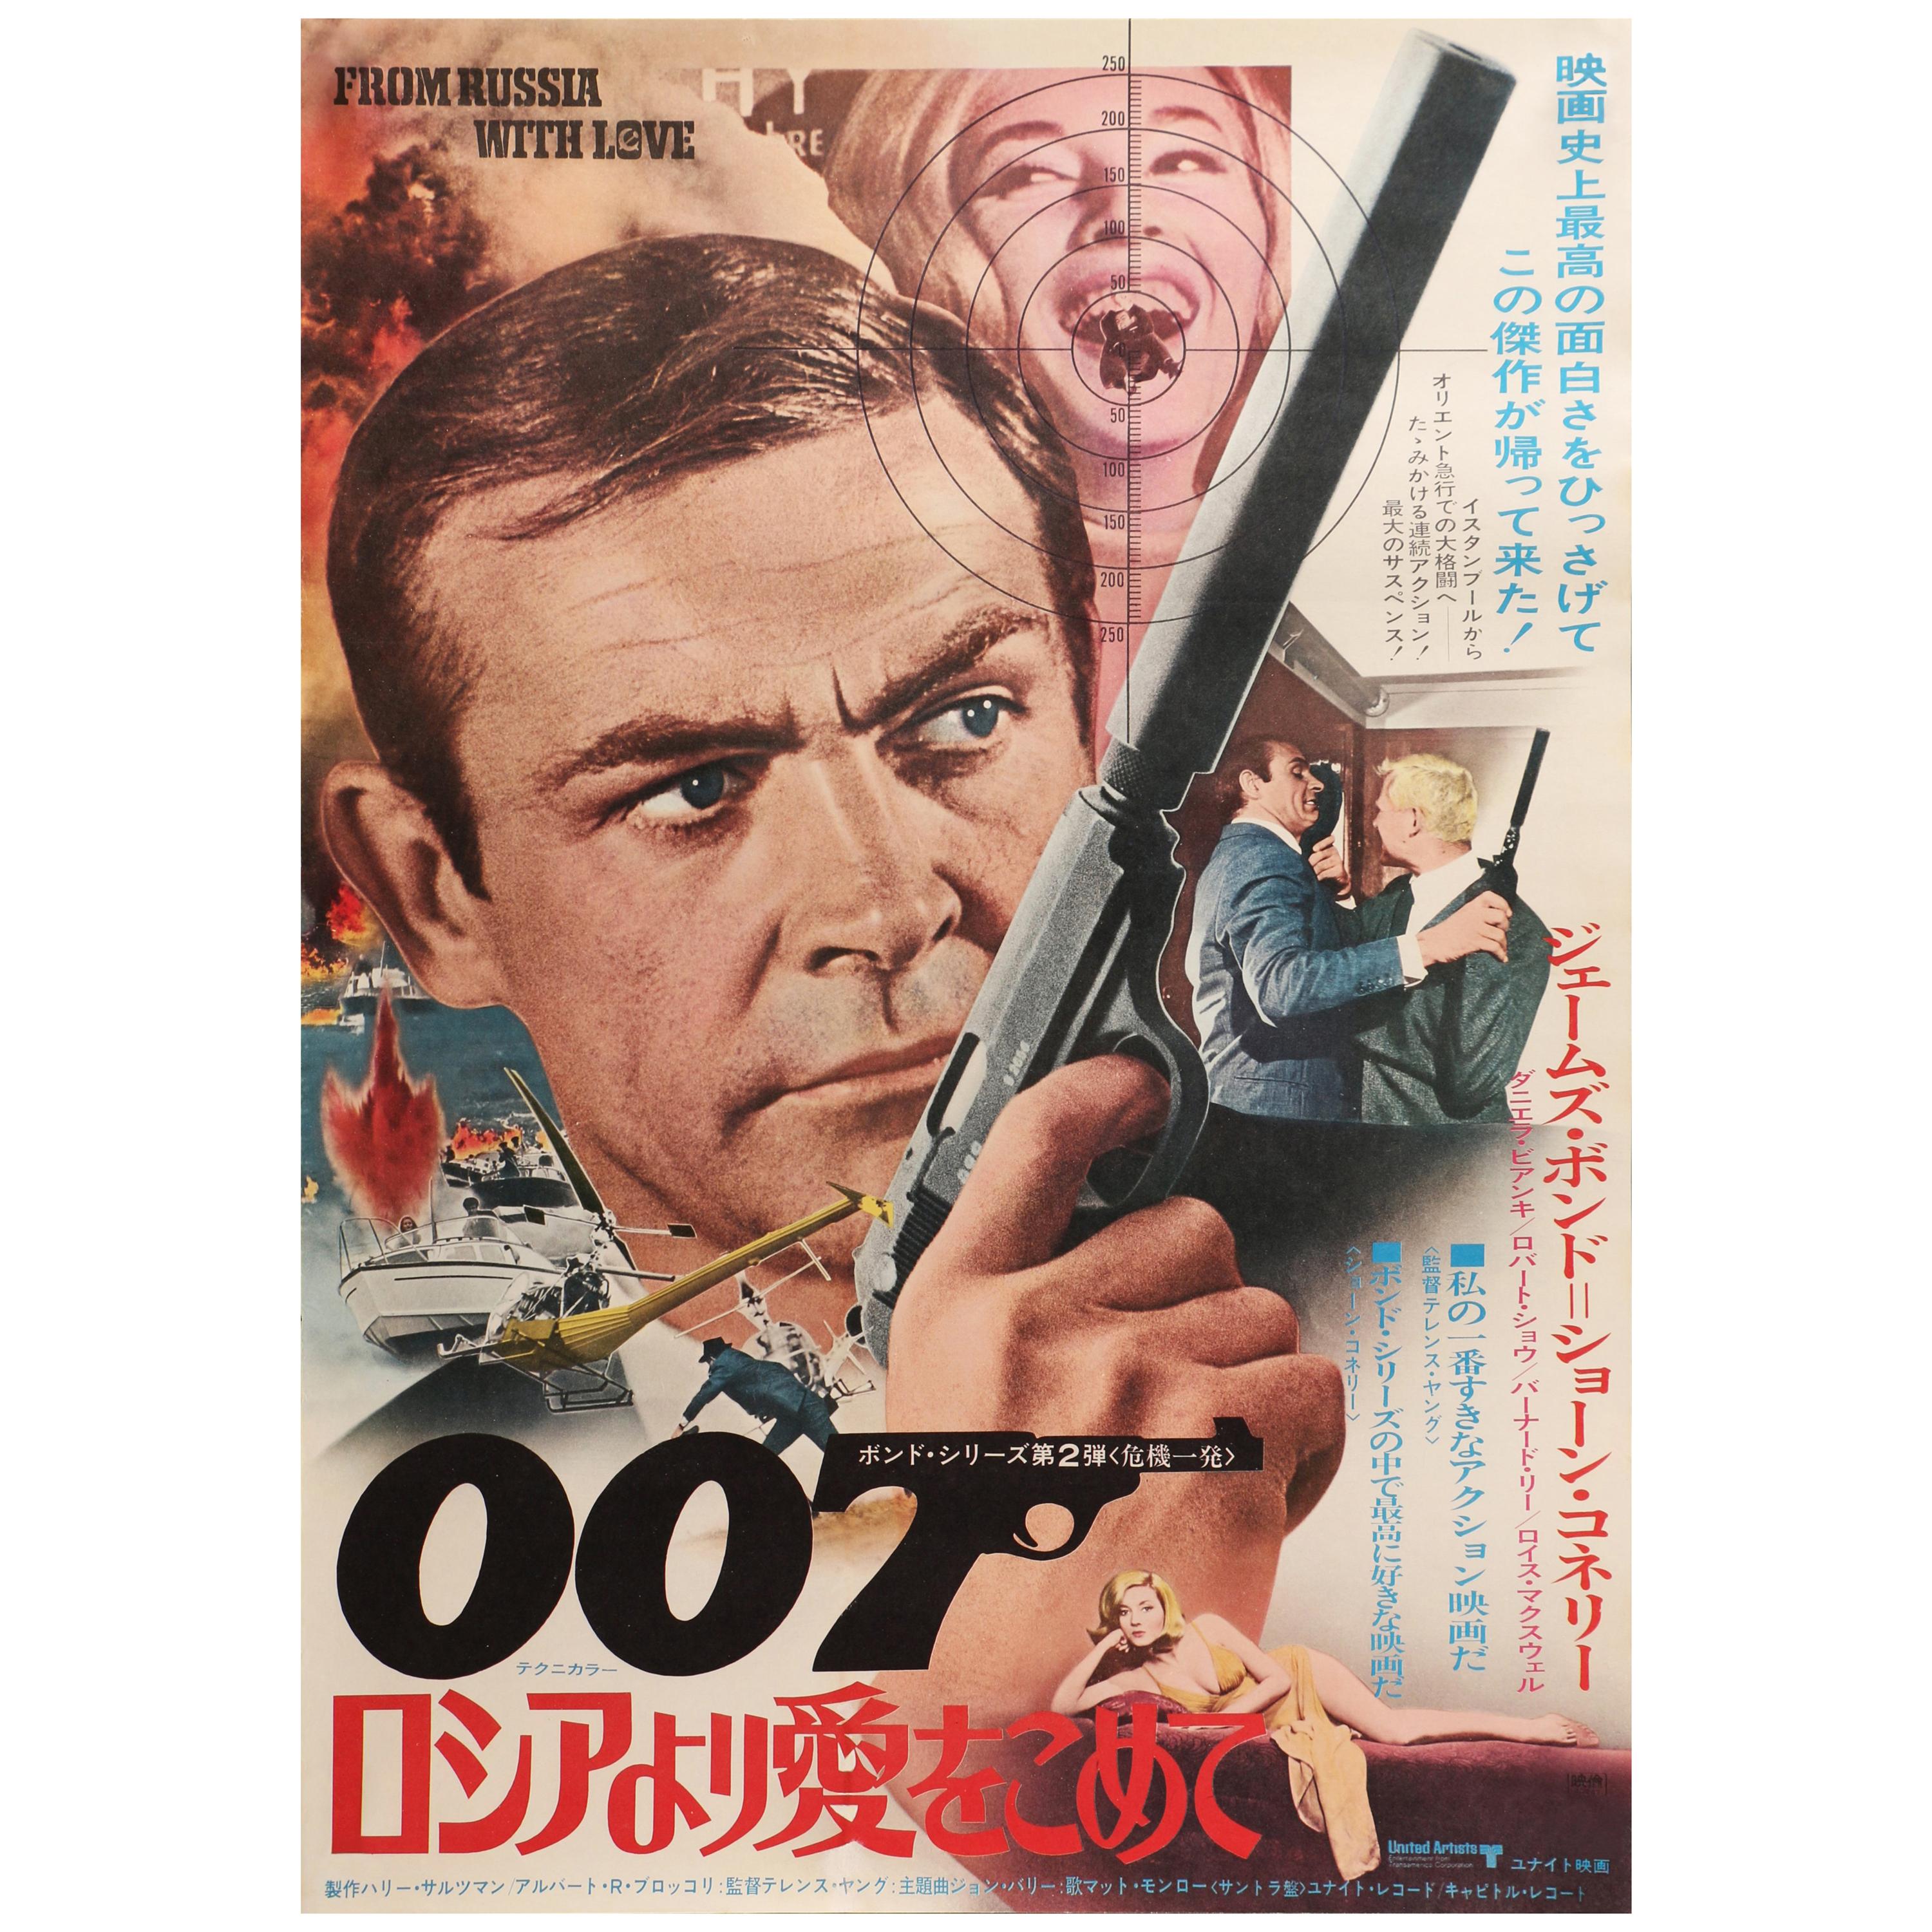 James Bond 'From Russia With Love' Original Vintage Japanese Movie Poster, 1972